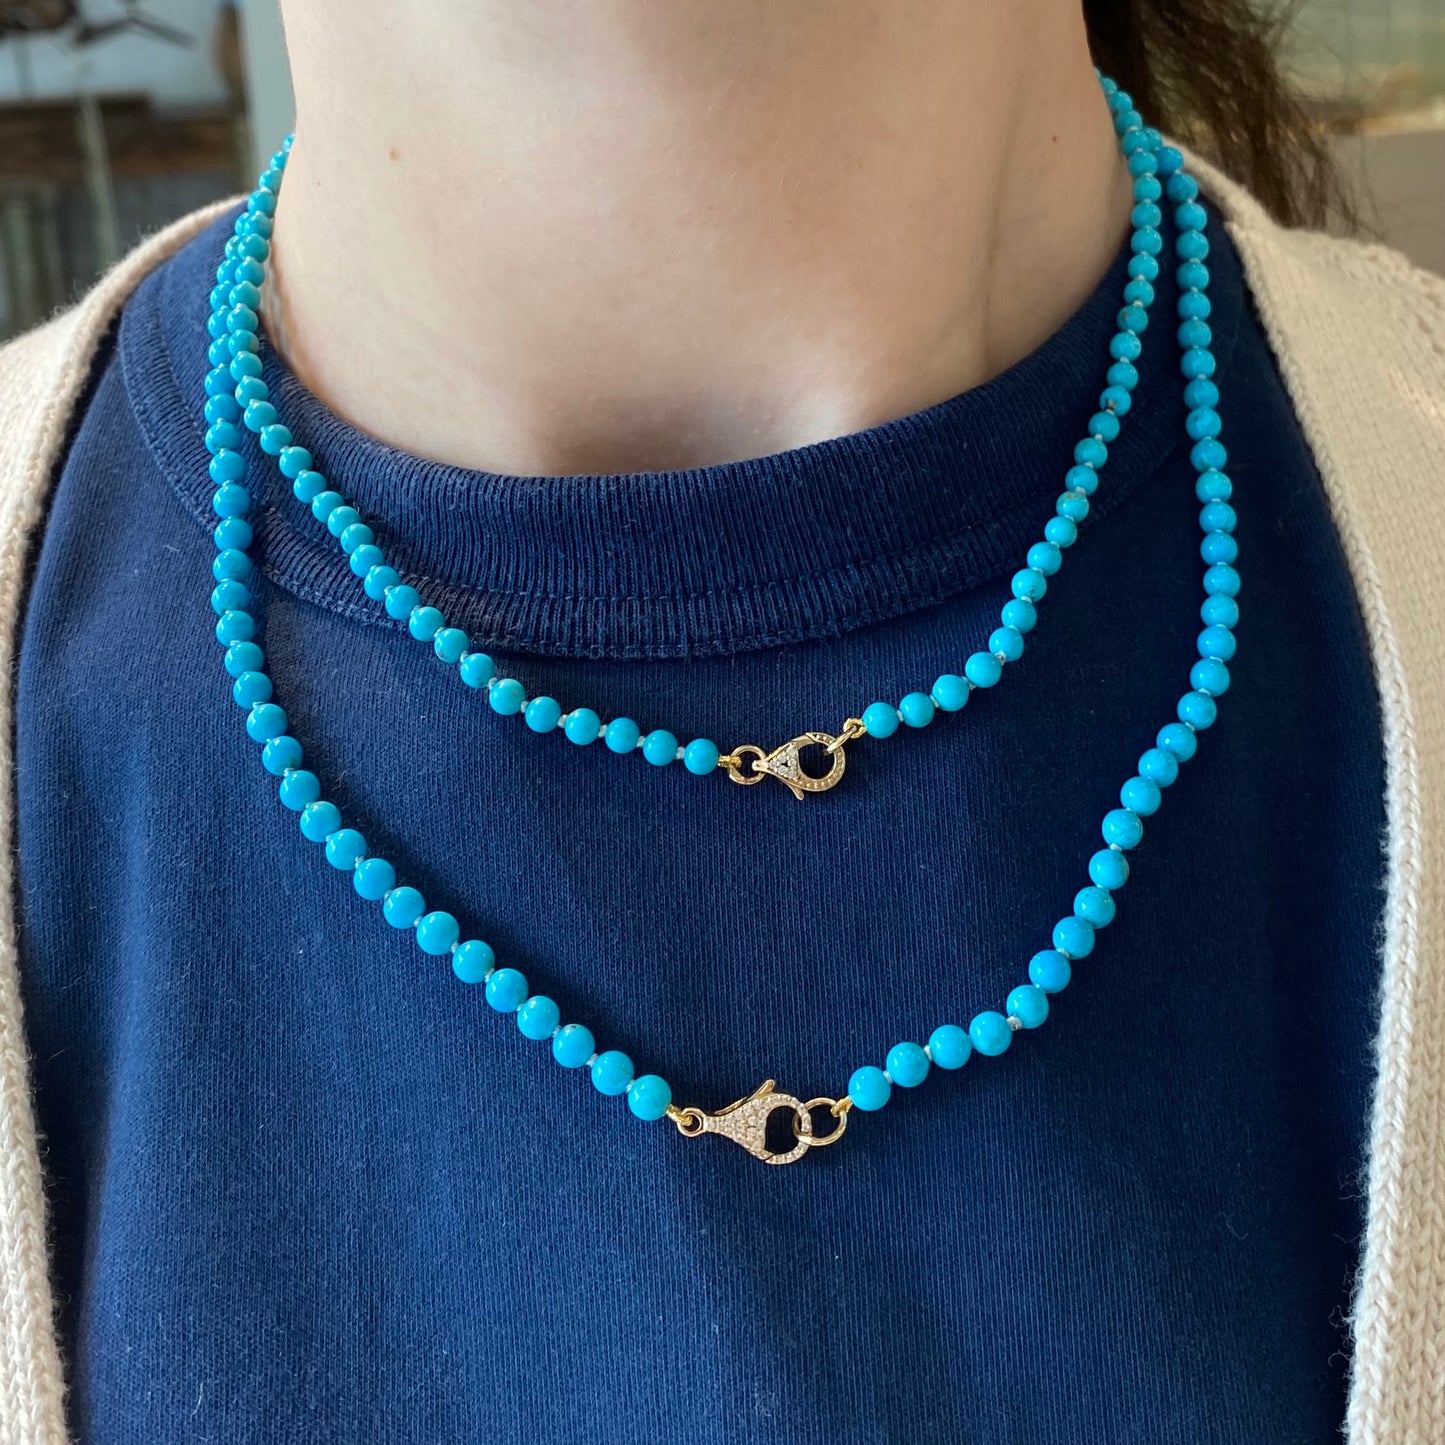 18" Turquoise Necklace with Diamond Clasp